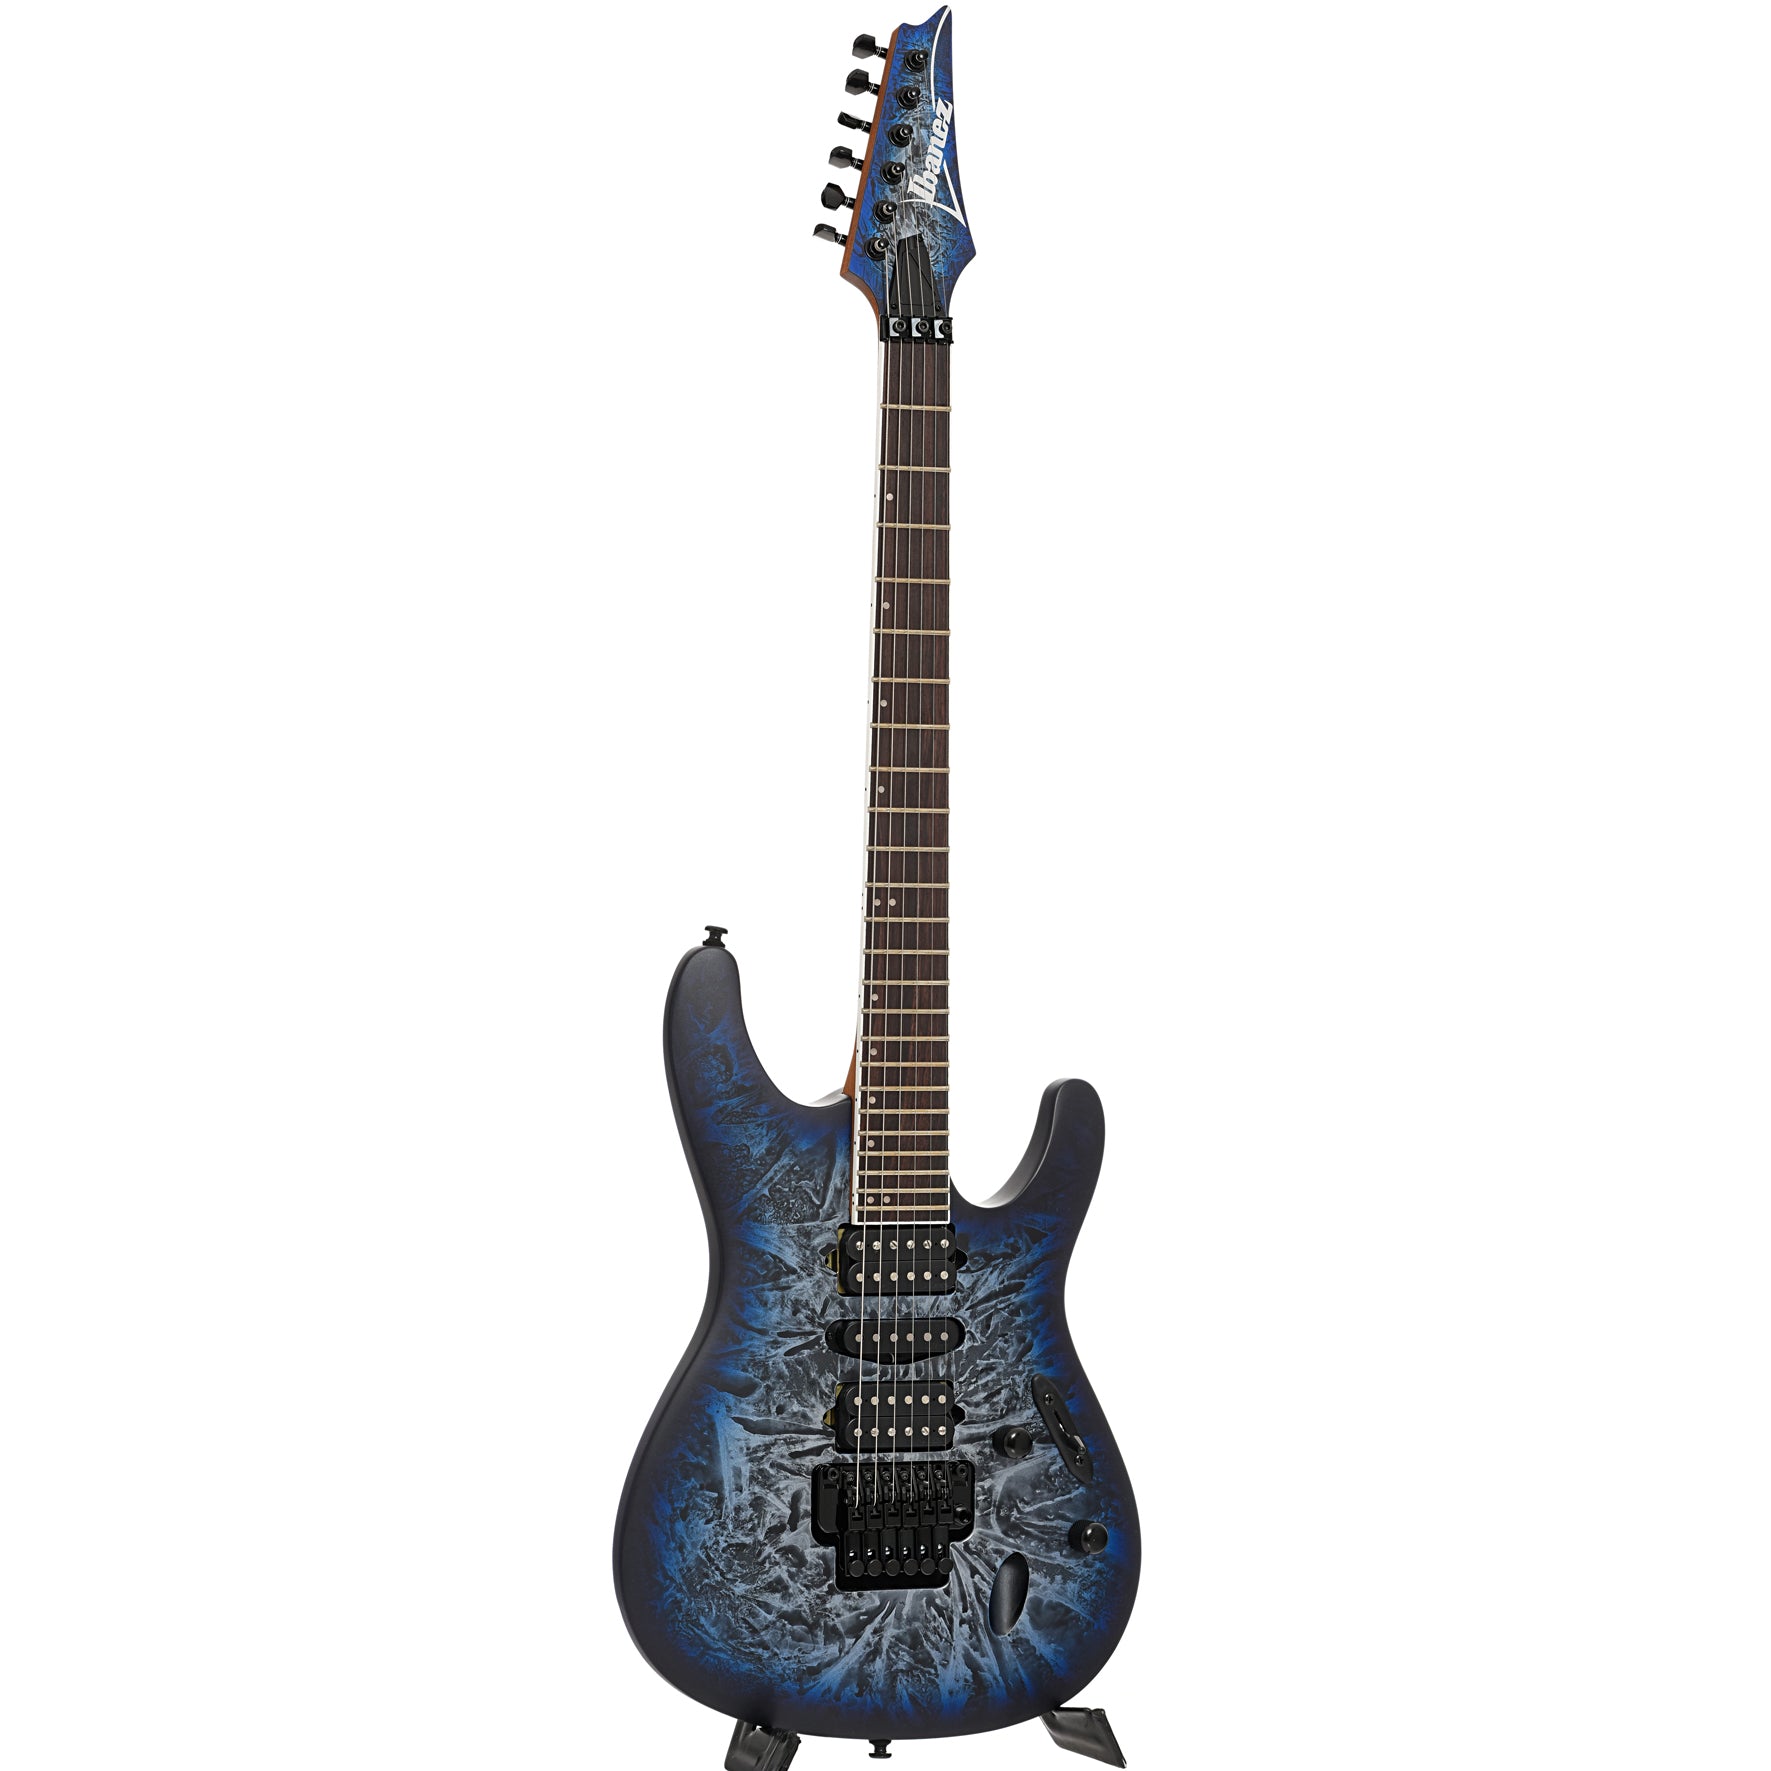 Full front and side of Ibanez B-Stock S770 Electric Guitar, Cosmic Blue Frozen Matte